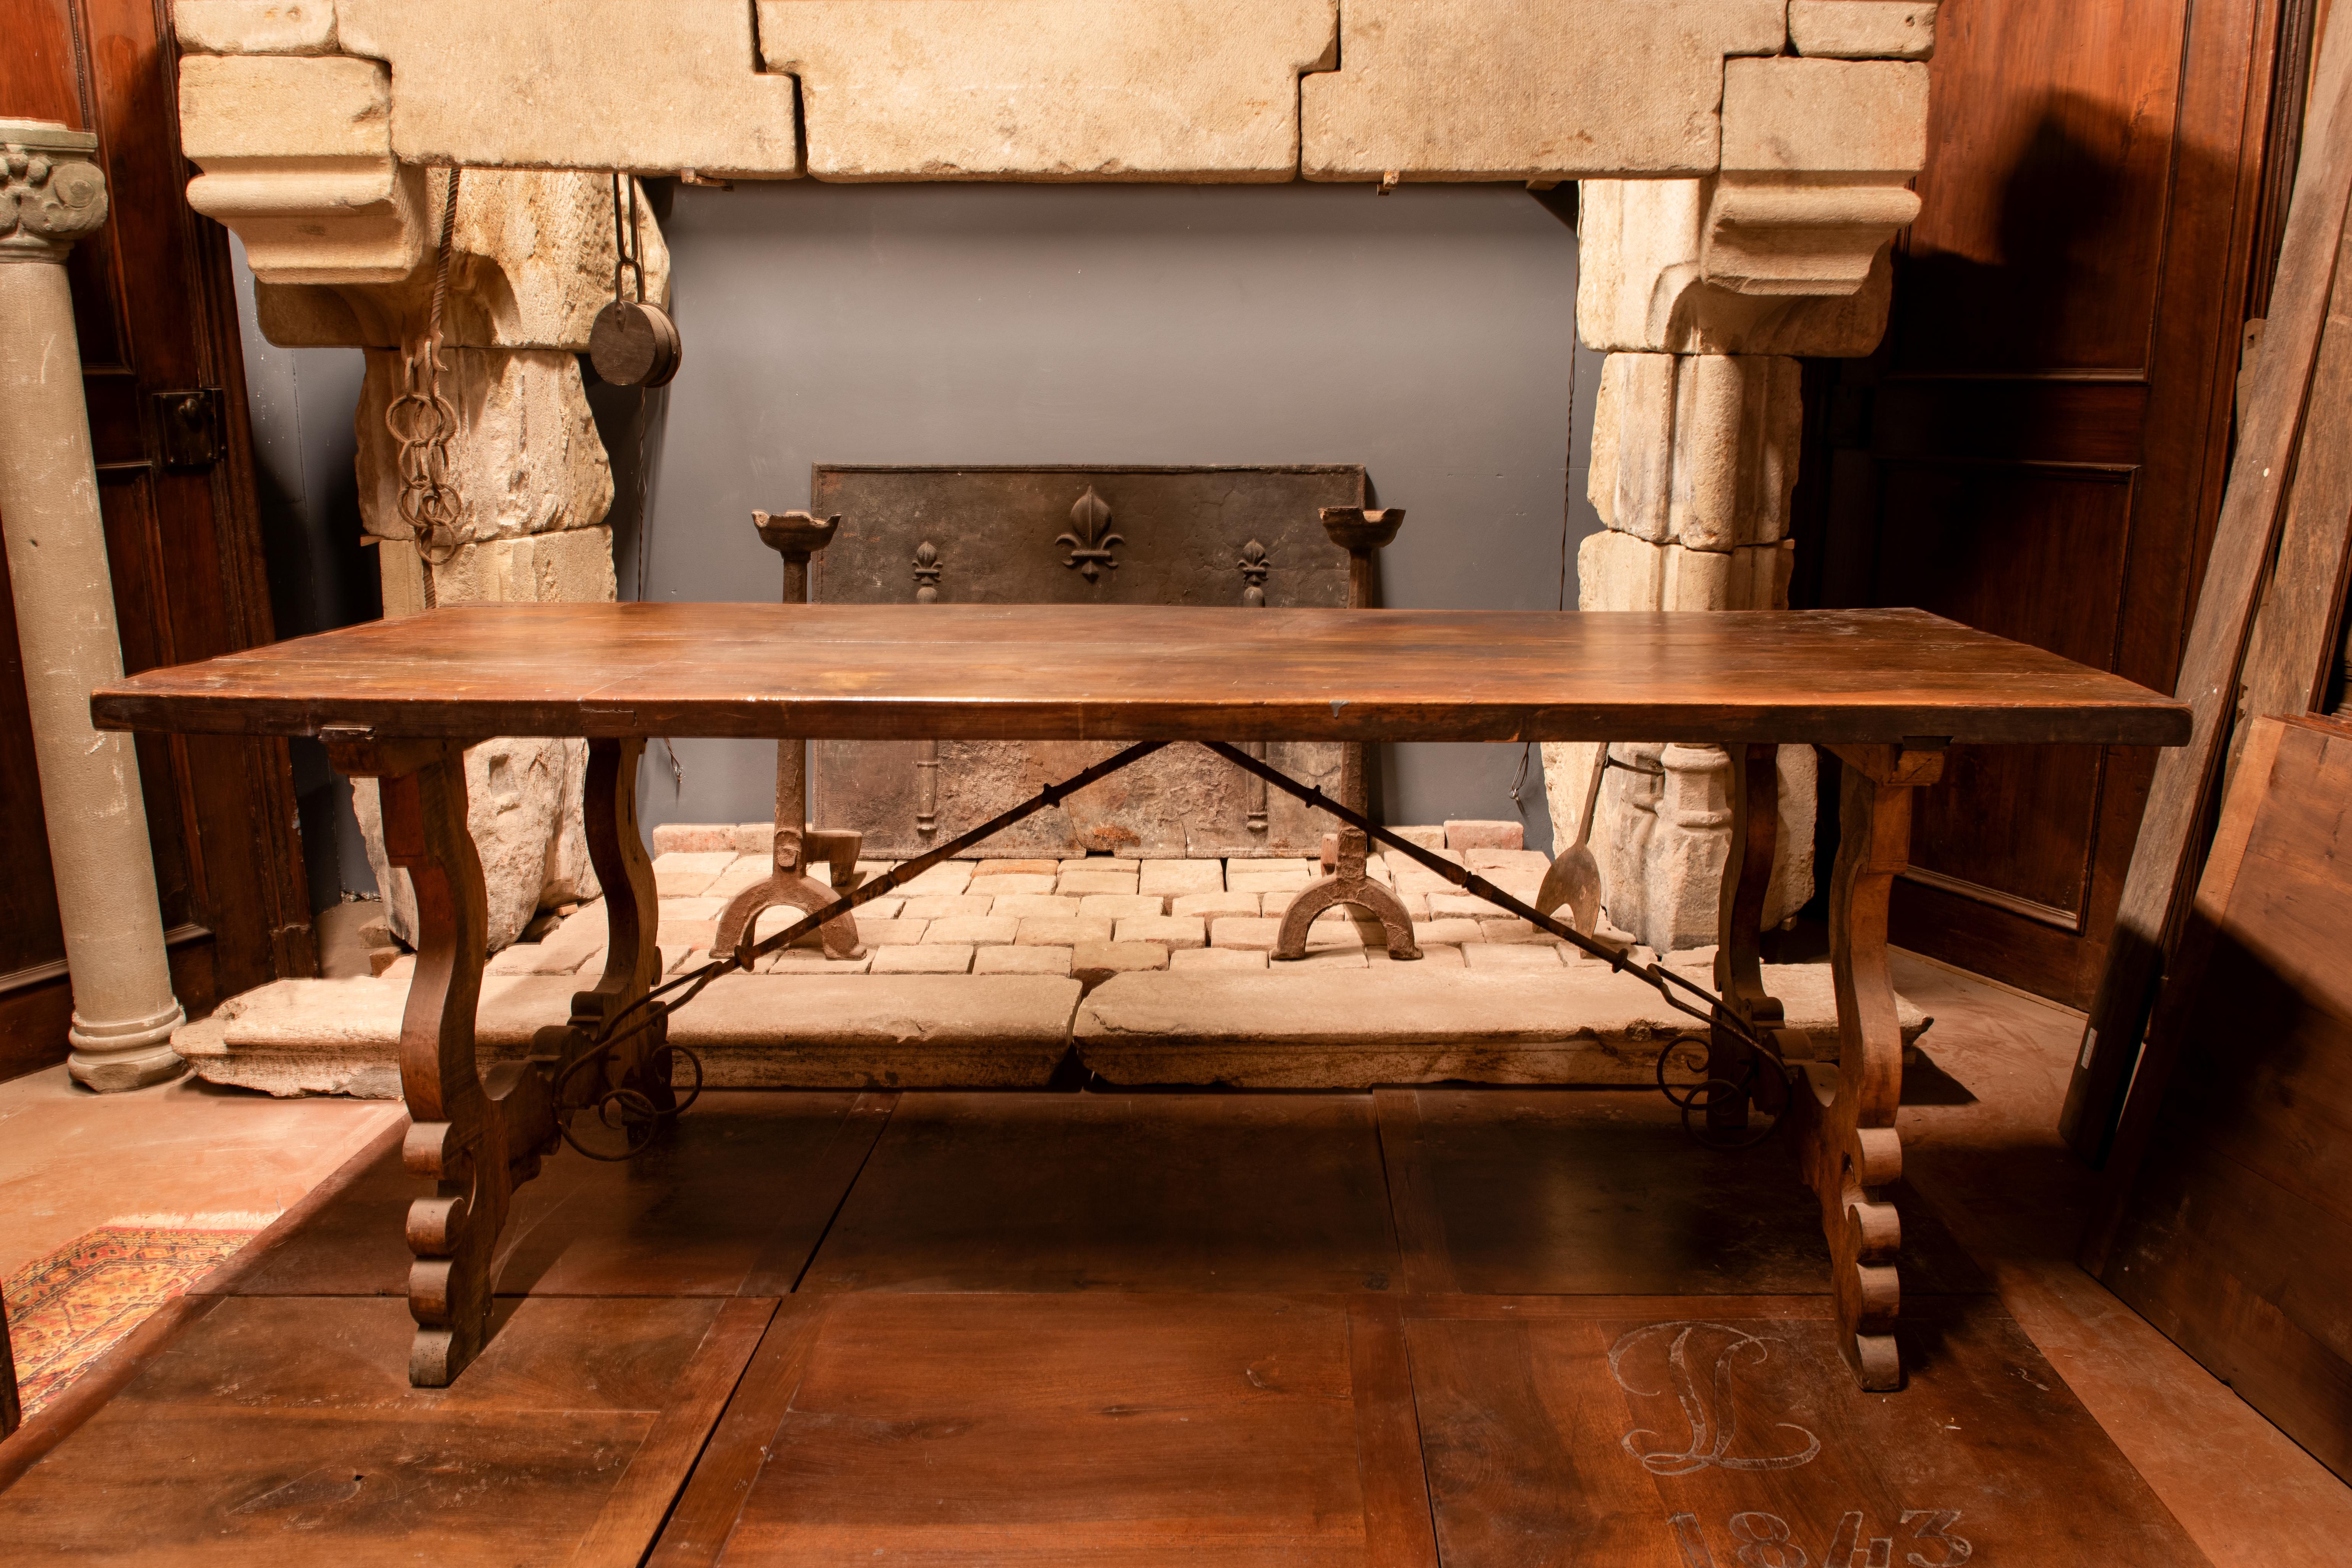 Antique refectory table, hand-carved in precious walnut wood, large, beautiful plank in one very old piece, and hand-carved legs with original iron, from a dining room of a castle in Spain, from the 18th century.
Suitable for a luxurious dining